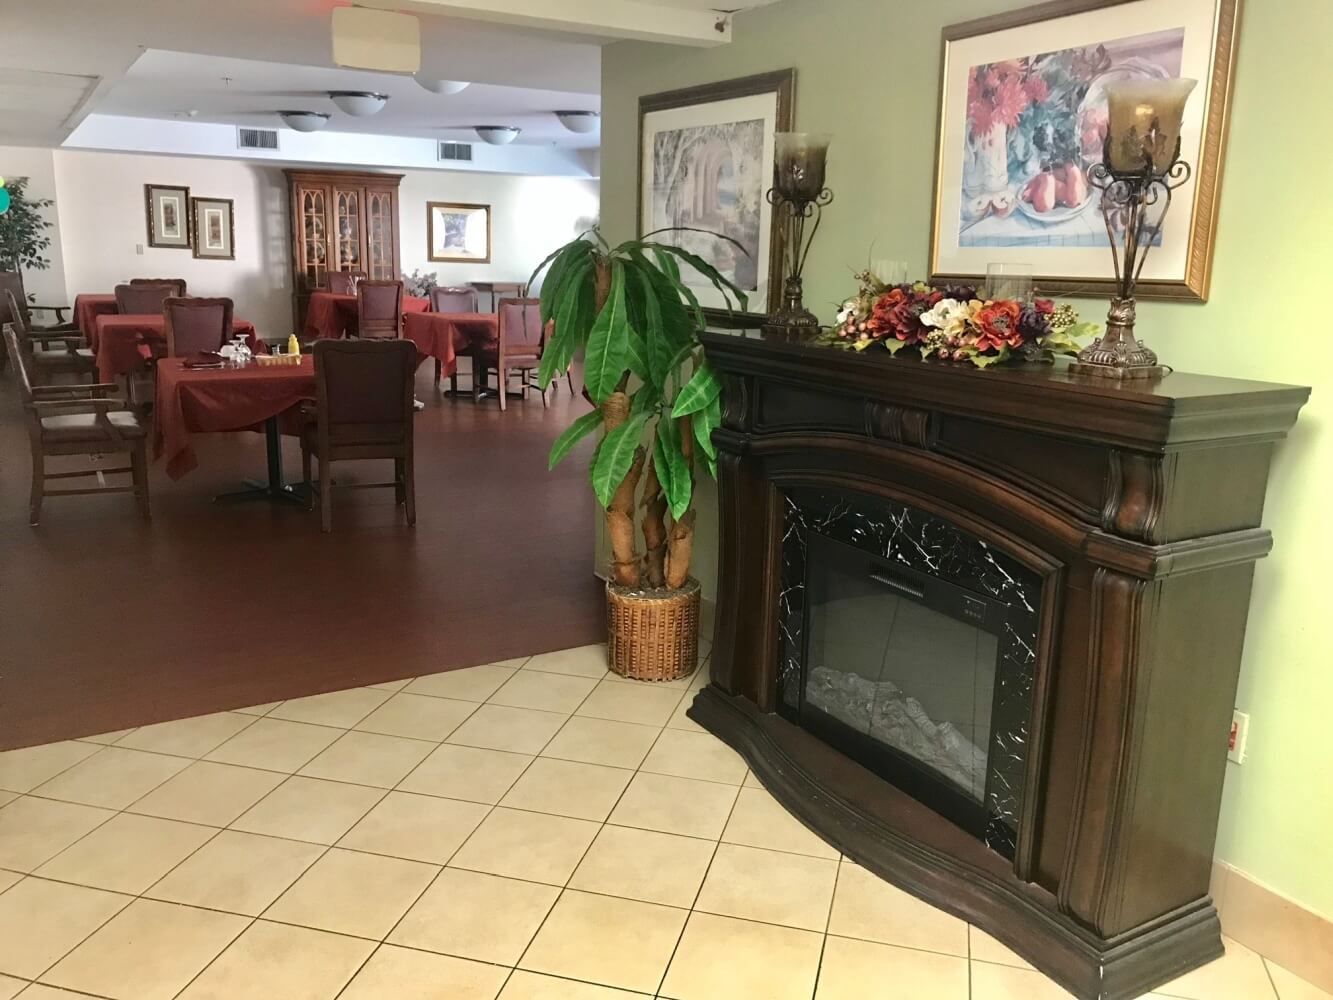 Interior view of SeaCoast at Uptown Oaks senior living community featuring architecture and decor.